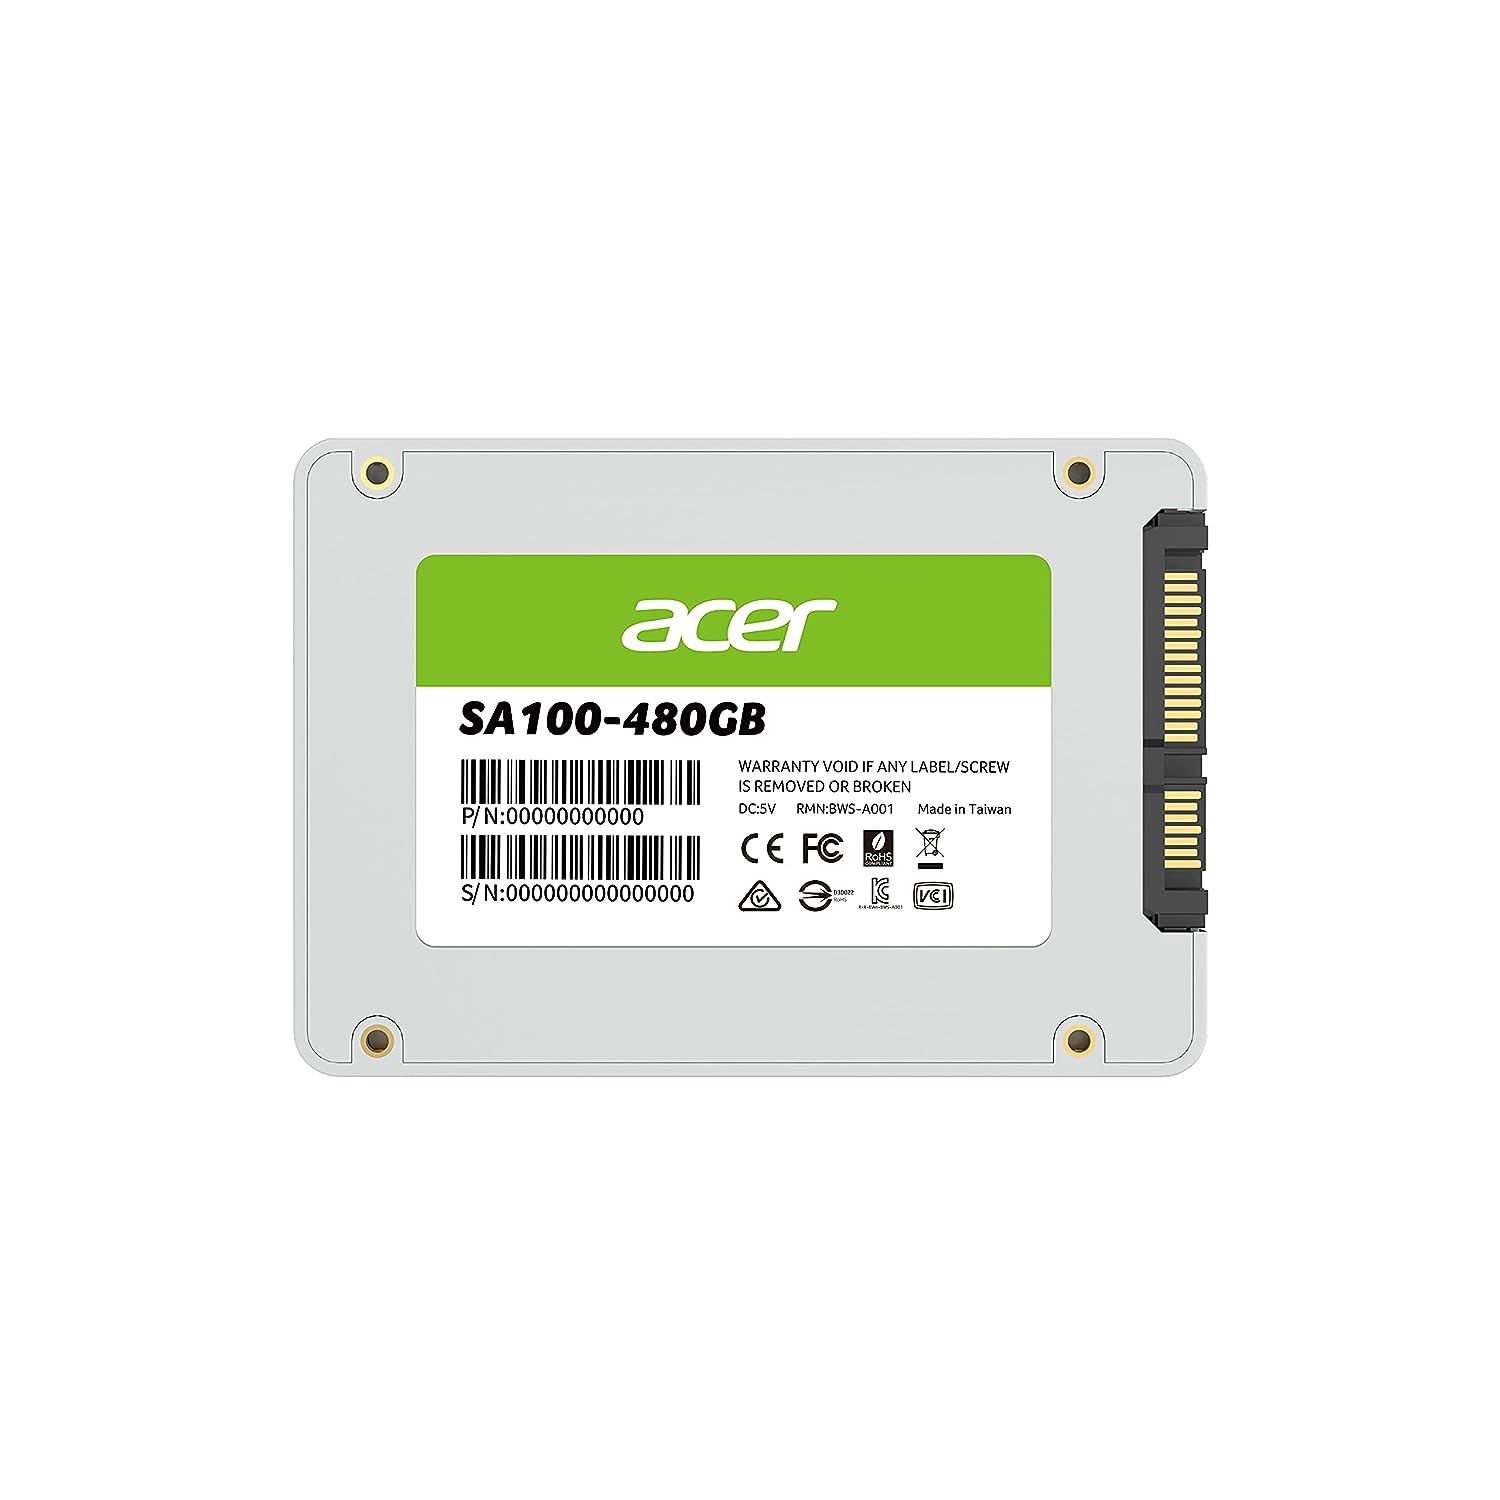 Acer SA100 480GB NAND SATA 2.5 Inch Internal SSD-560MBPs R 493MBPs W Speed